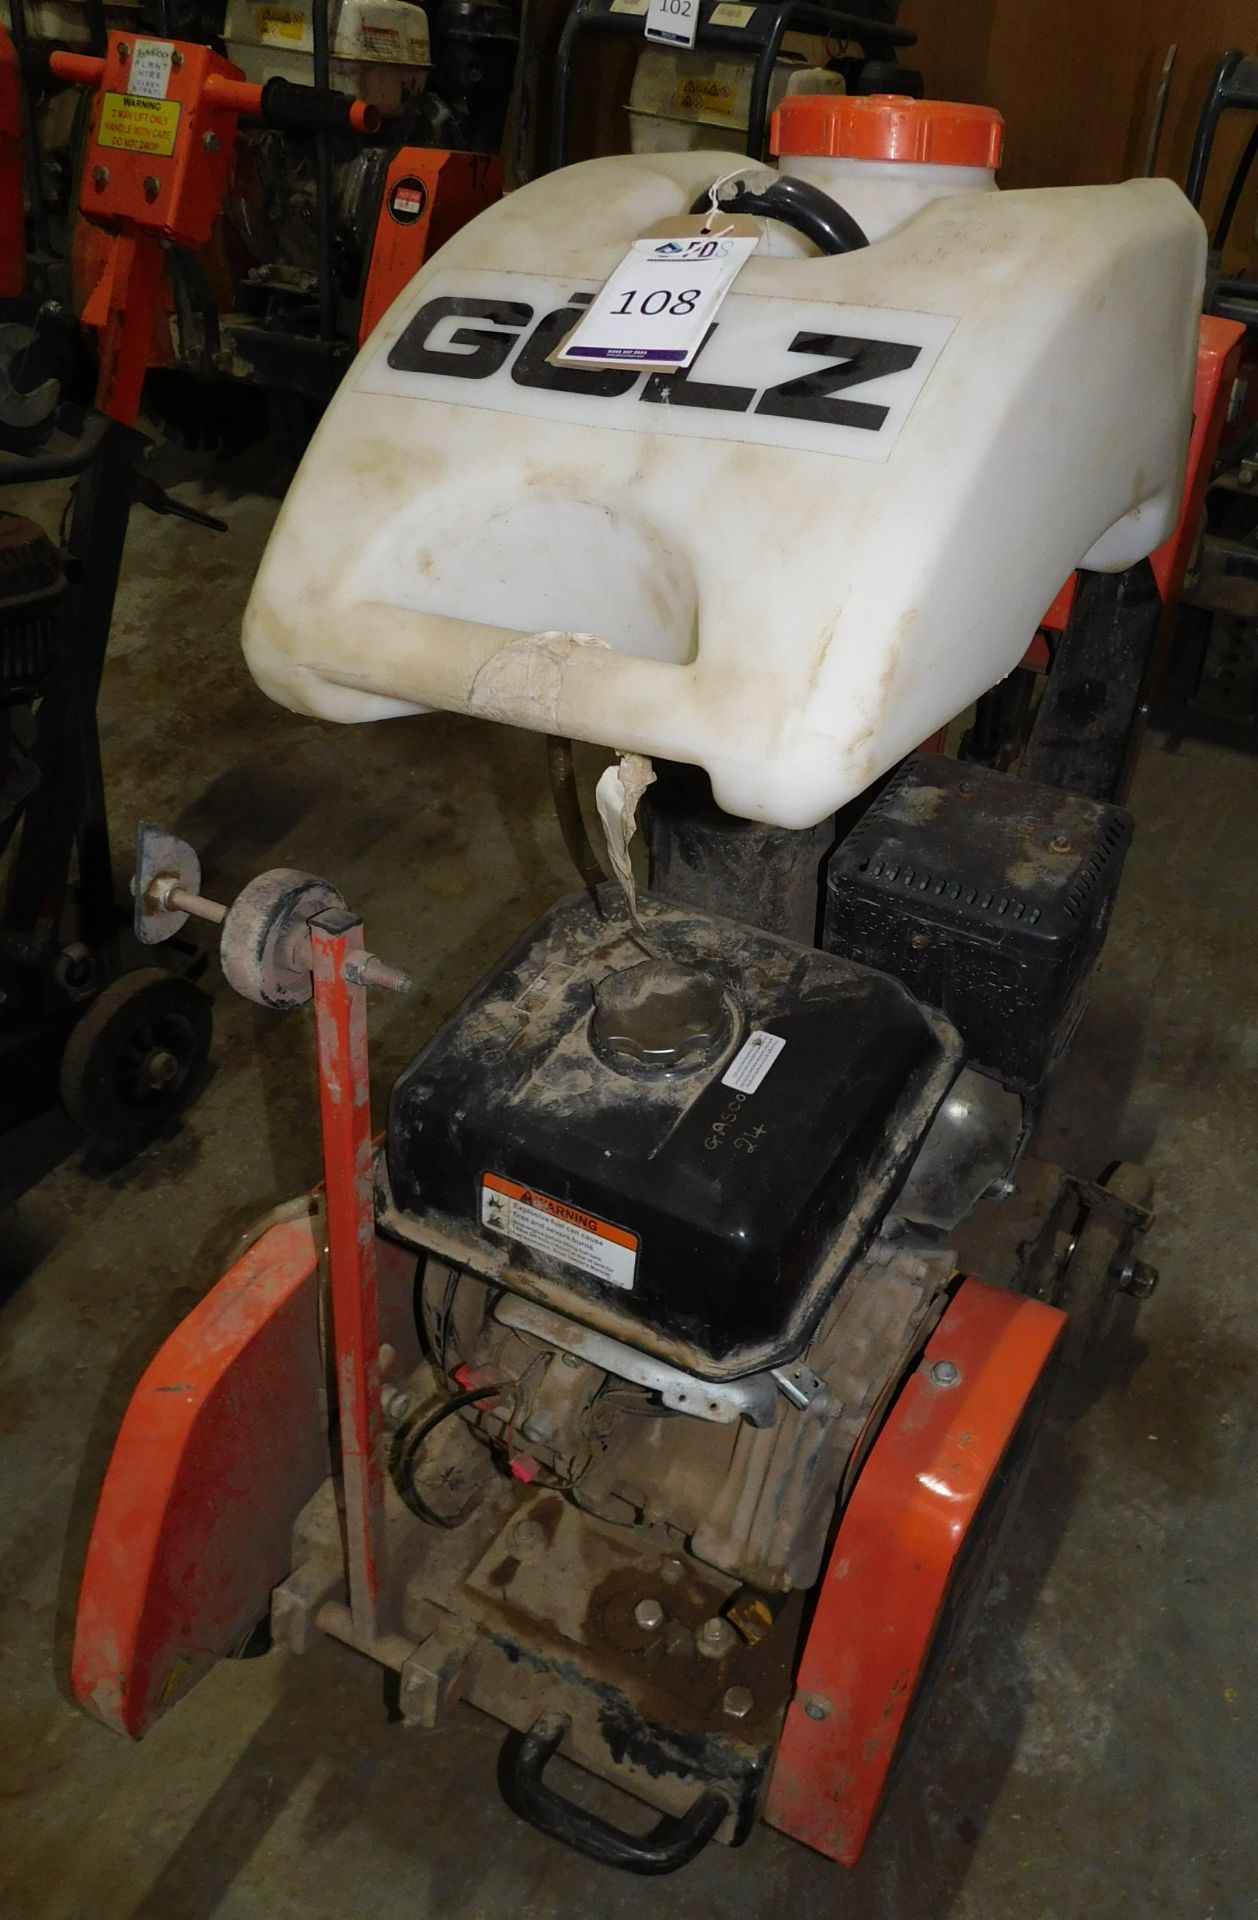 Golz FS175 Floor Saw, Petrol (Location: March, Cambridge. Please Refer to General Notes) - Image 4 of 4